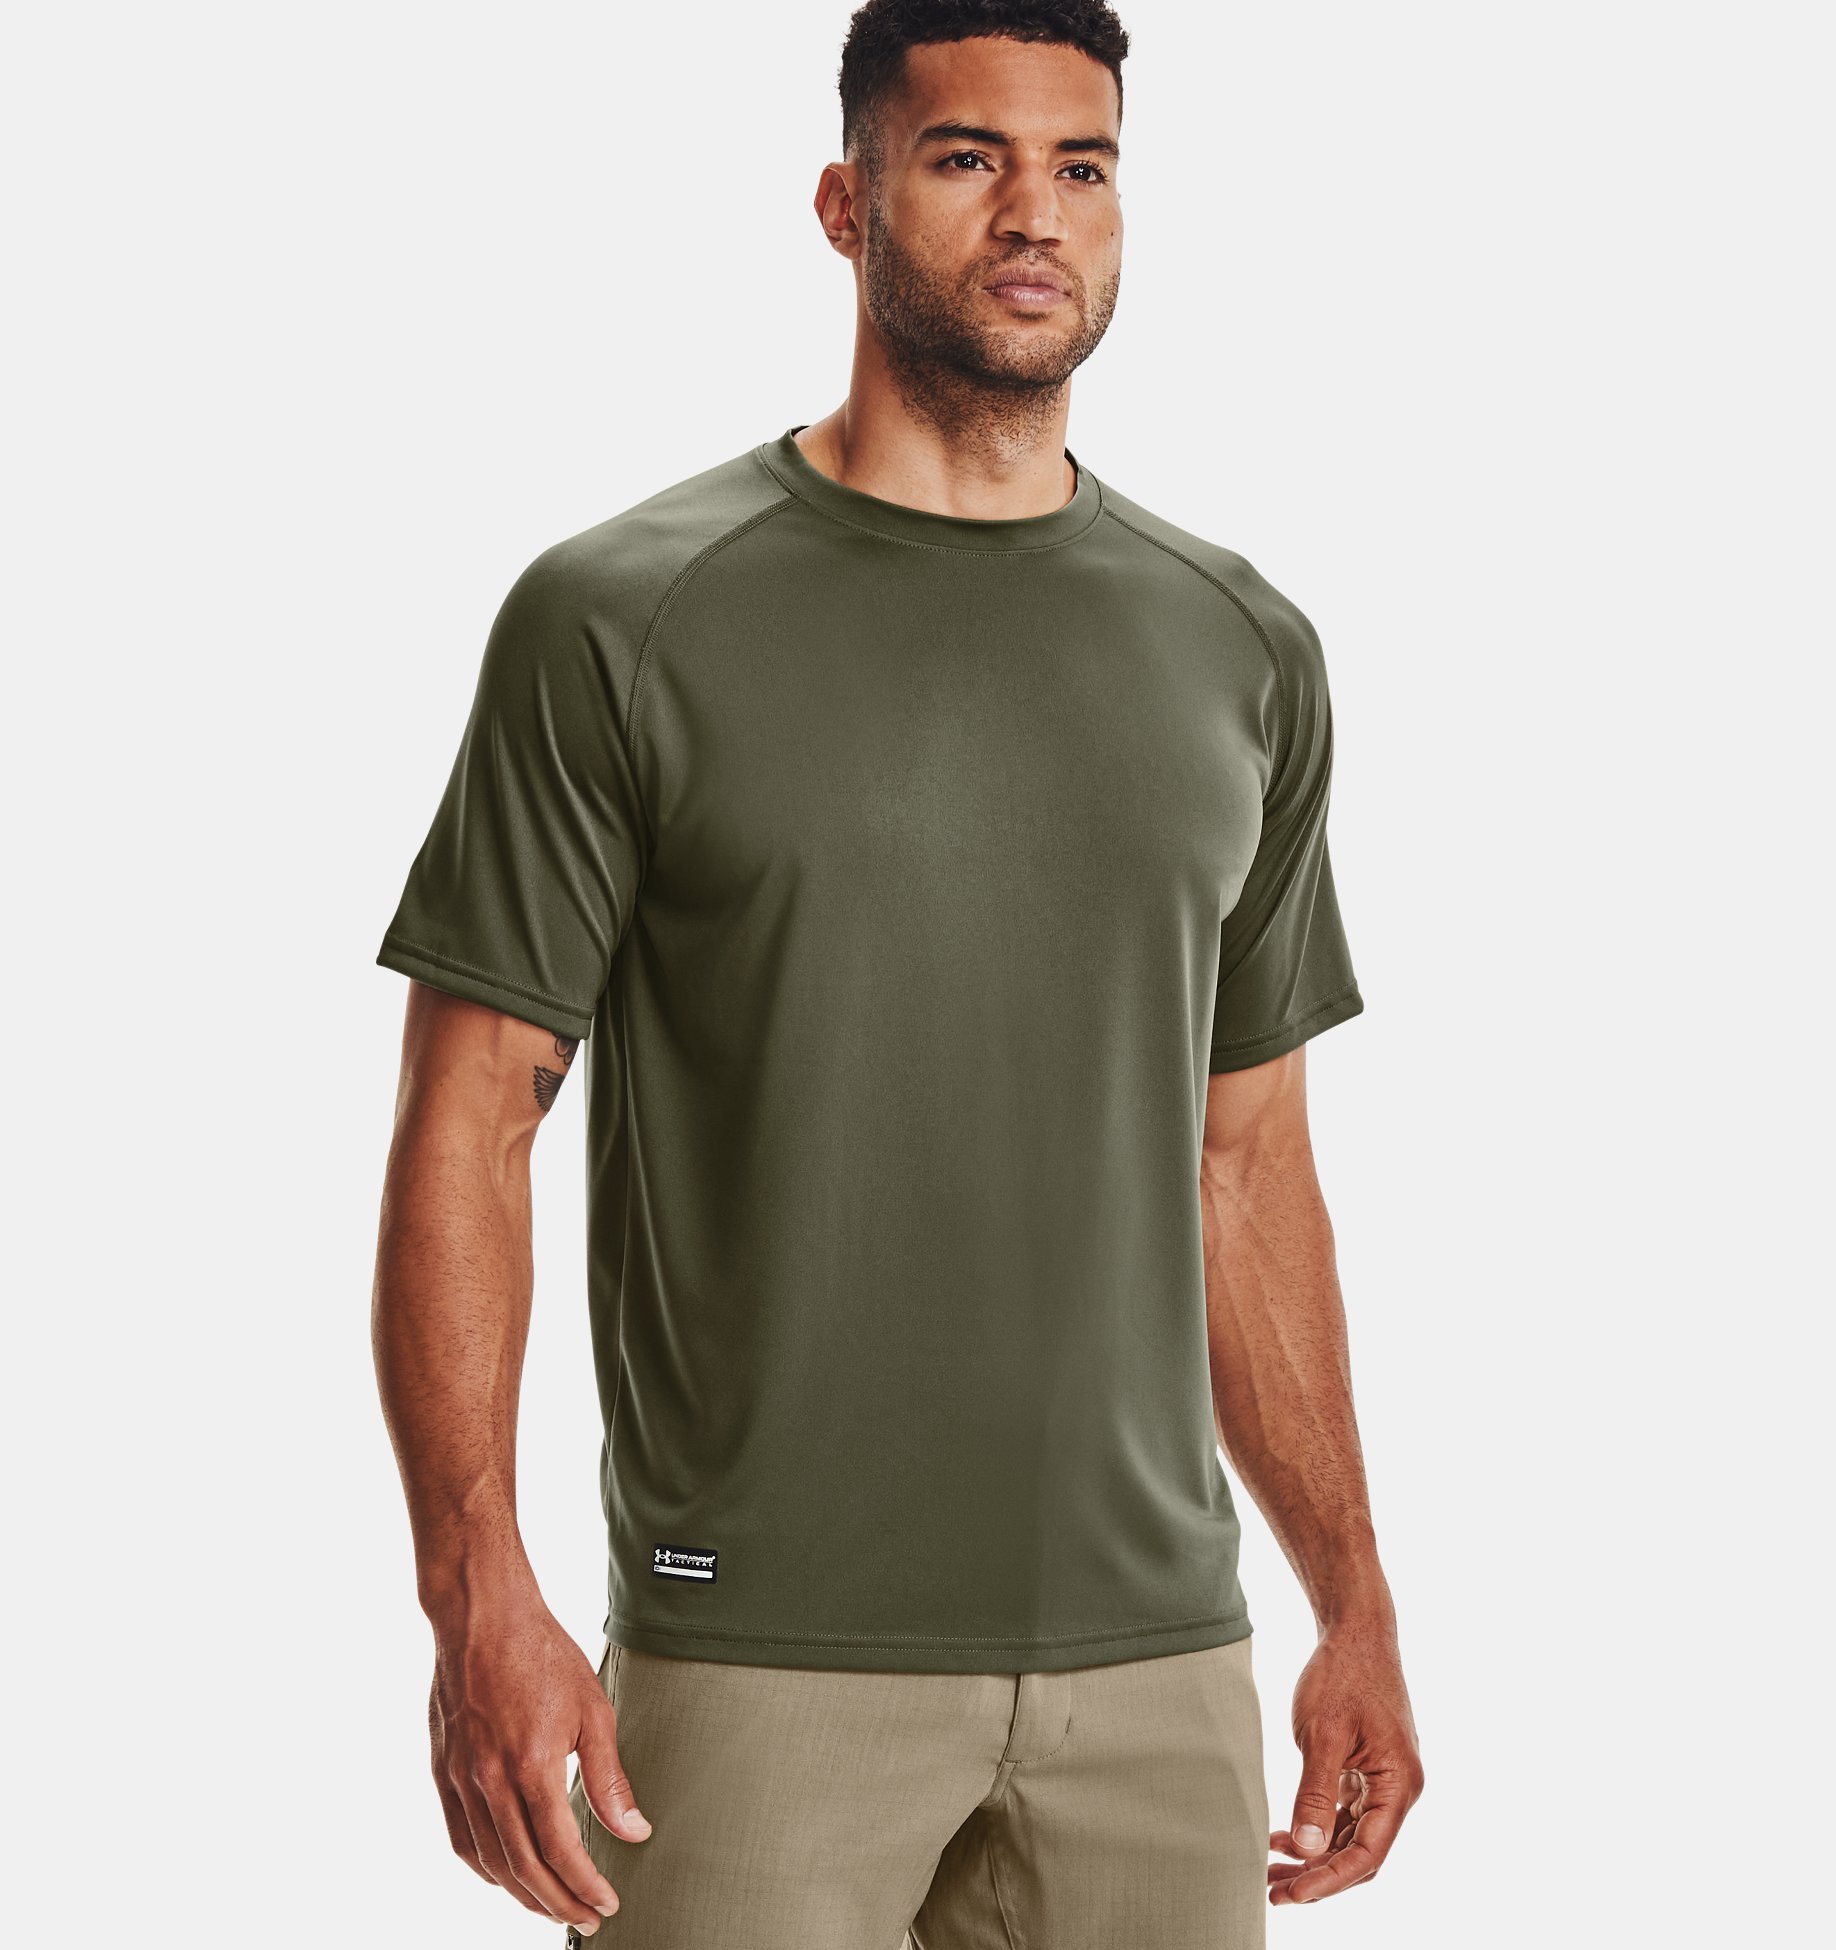 Under Armour Compression Short Sleeve T-Shirt Camo Green Army Sport Fitness 